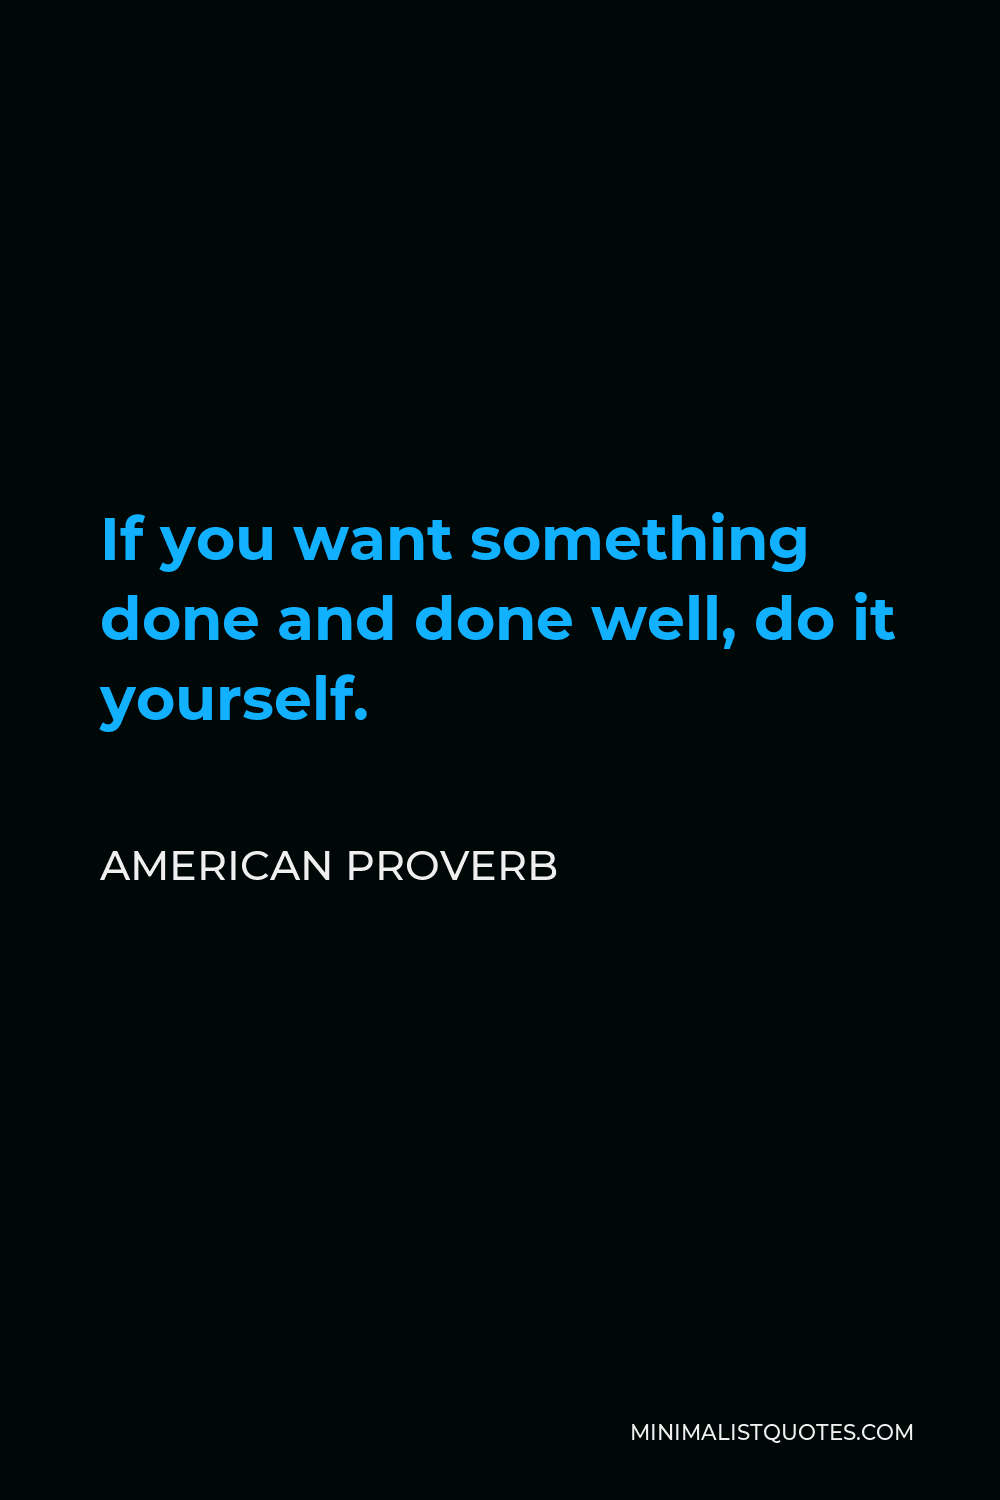 American Proverb Quote - If you want something done and done well, do it yourself.